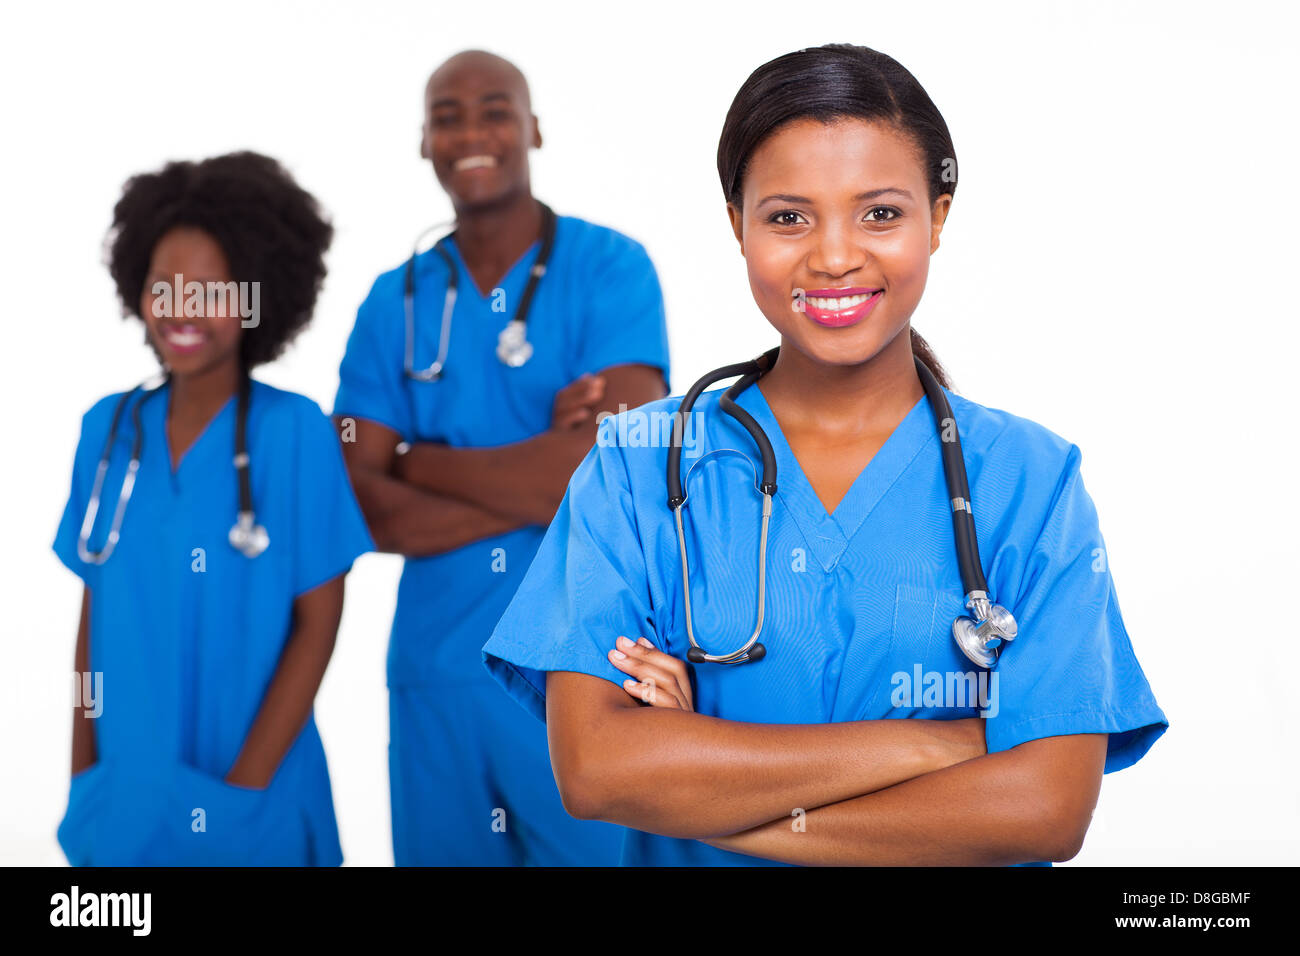 group of African American medical workers on white background Stock Photo